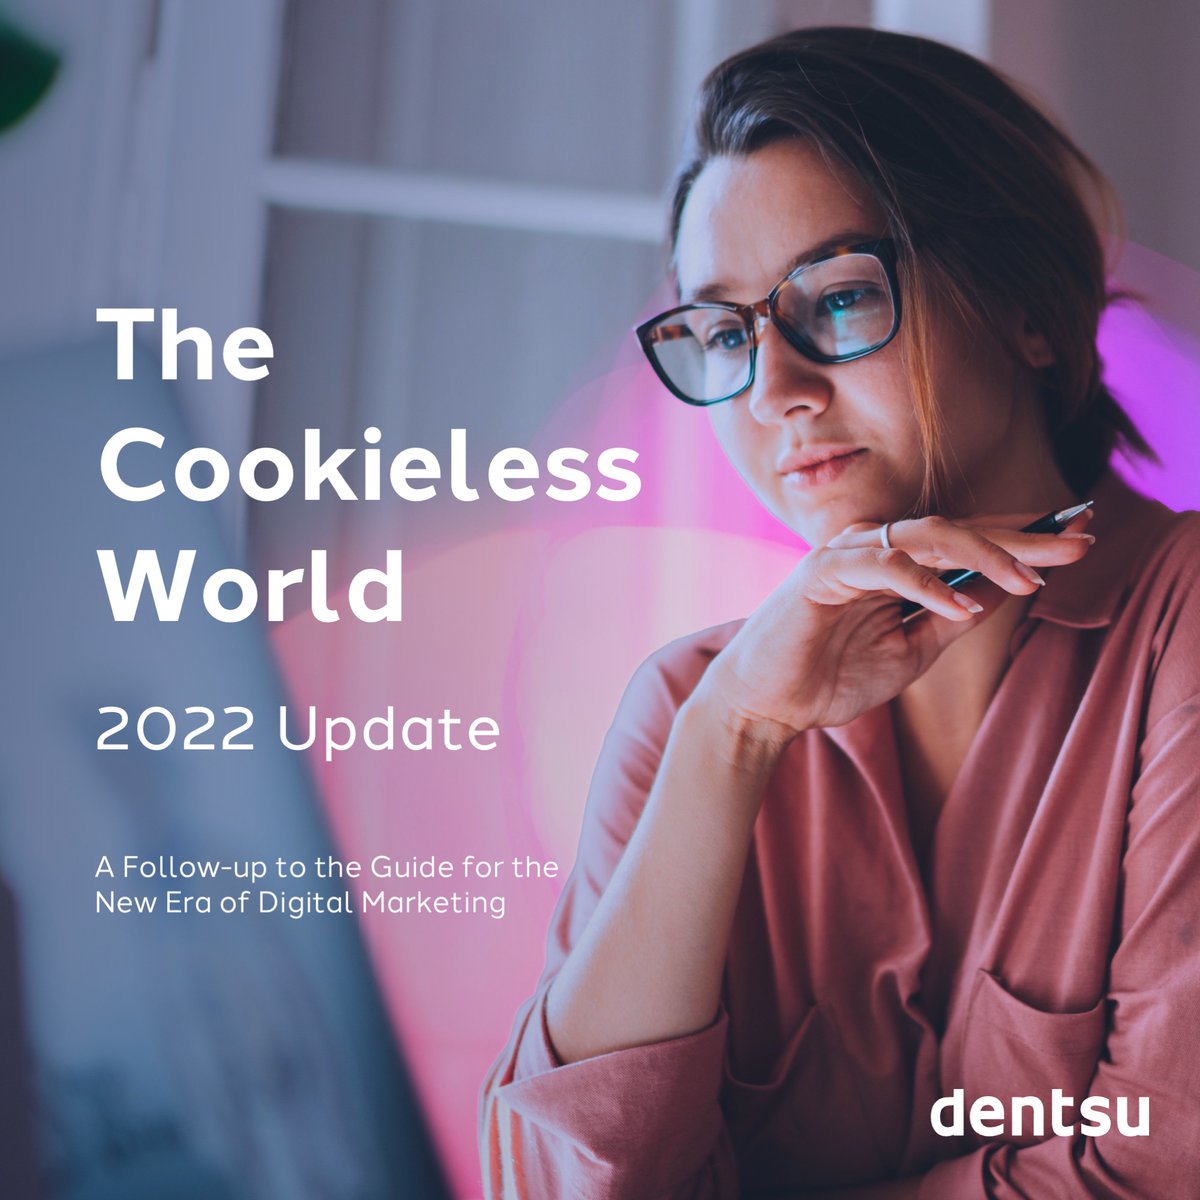 We identified 3 considerations for #brands around #data management, #audience activation & performance measurement in our newest report, The #Cookieless World 2022 Update. Explore them now, along with other useful tips & a checklist. fal.cn/3tbHj #digitaladvertising